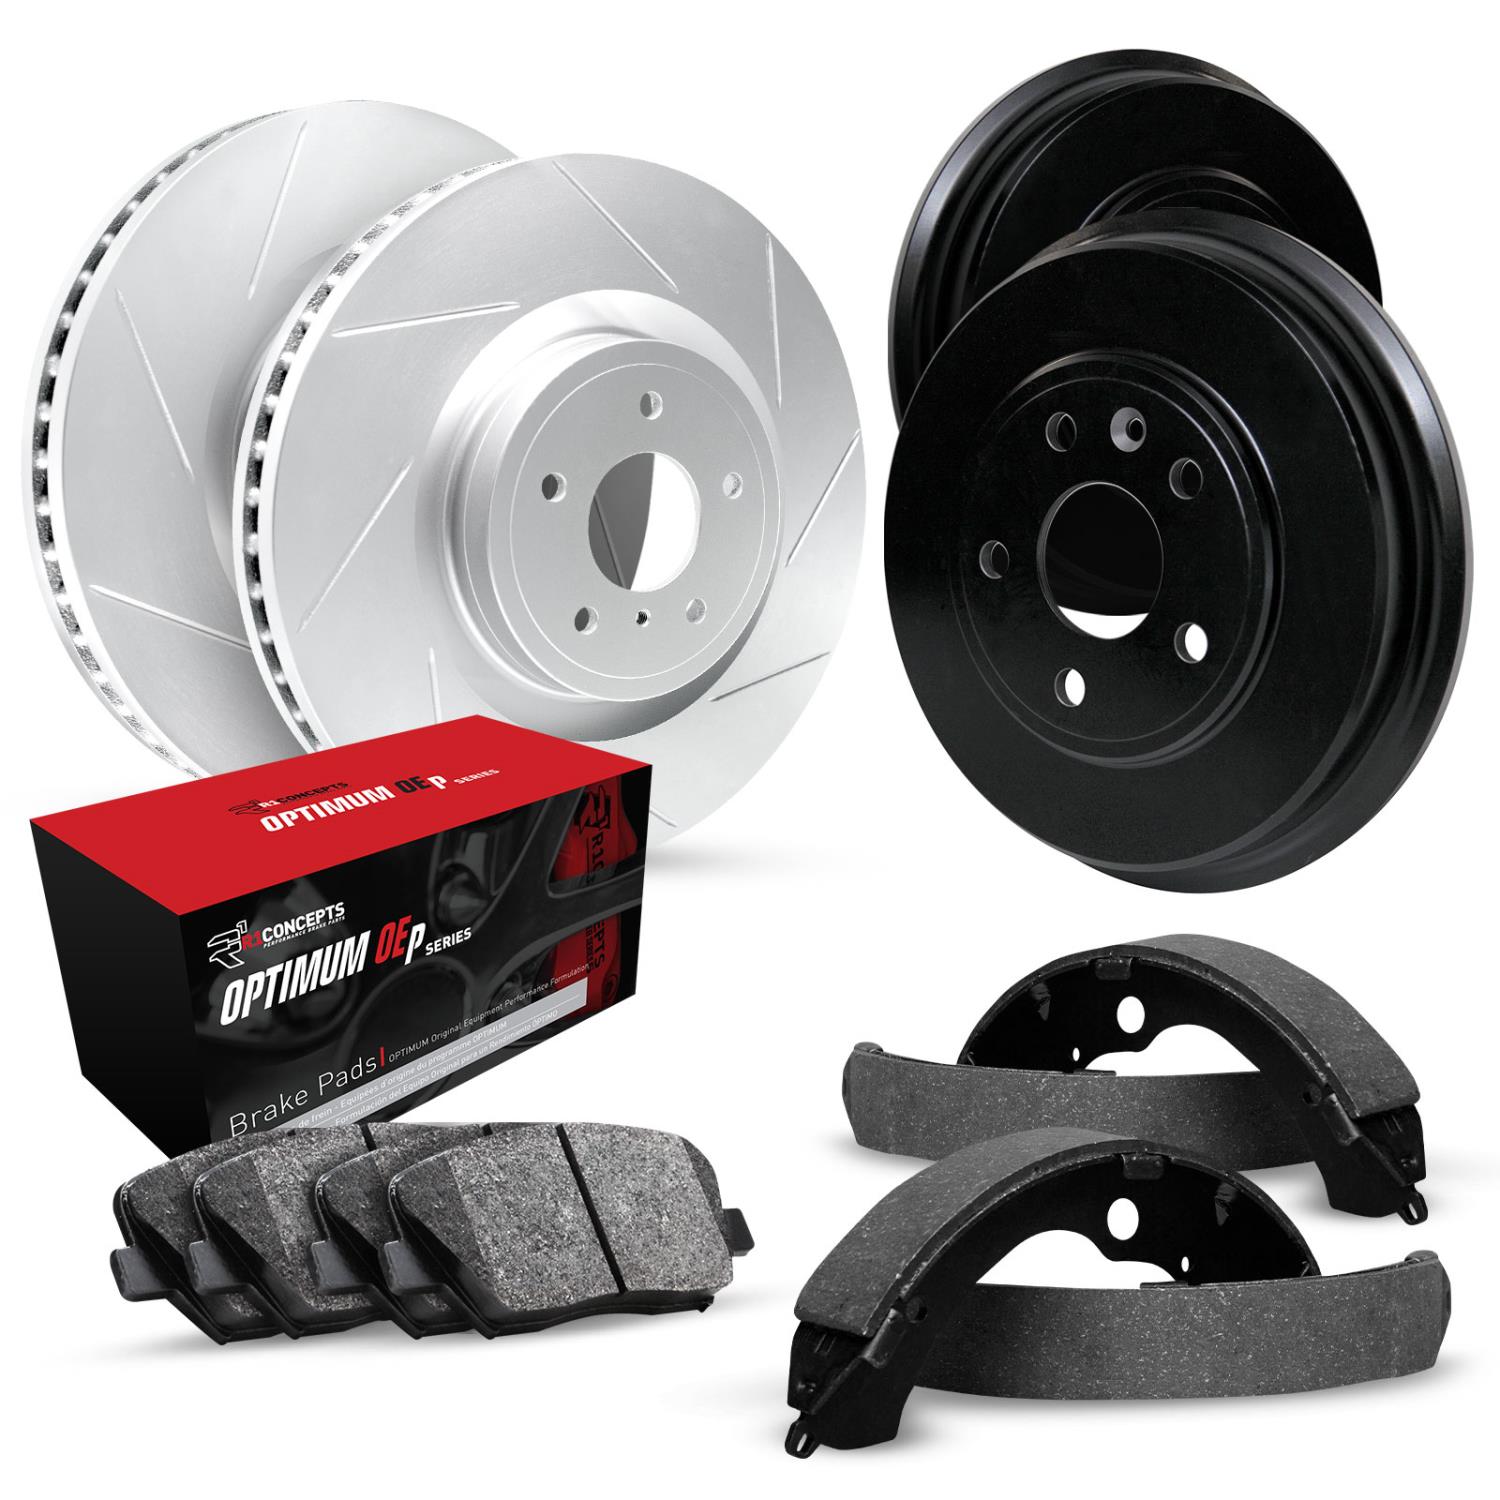 GEO-Carbon Slotted Brake Rotor & Drum Set w/Optimum OE Pads & Shoes, 1998-2003 GM, Position: Front & Rear